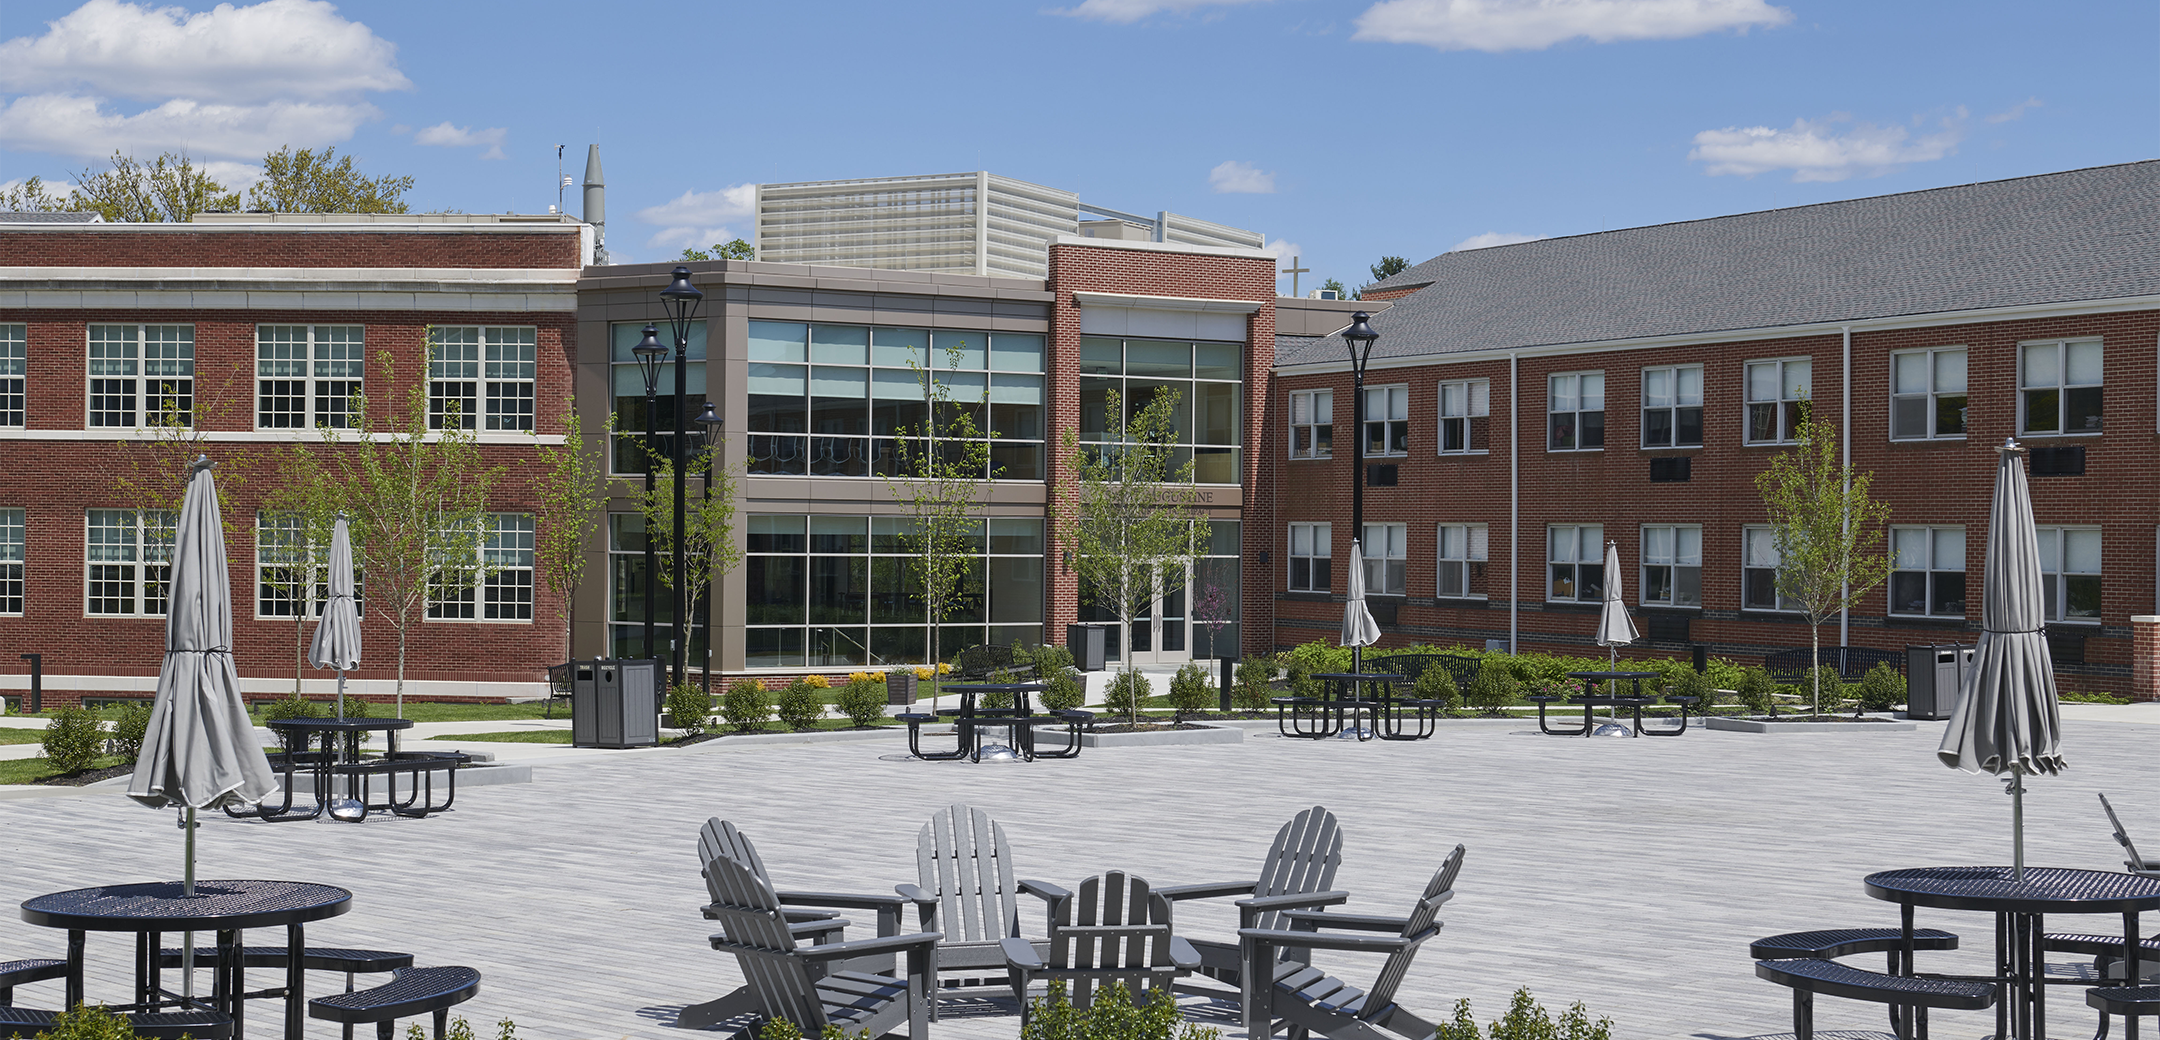 An image of the Malvern Prep school inner courtyard featuring brick flooring and outdoor patio seating with tables and chairs.